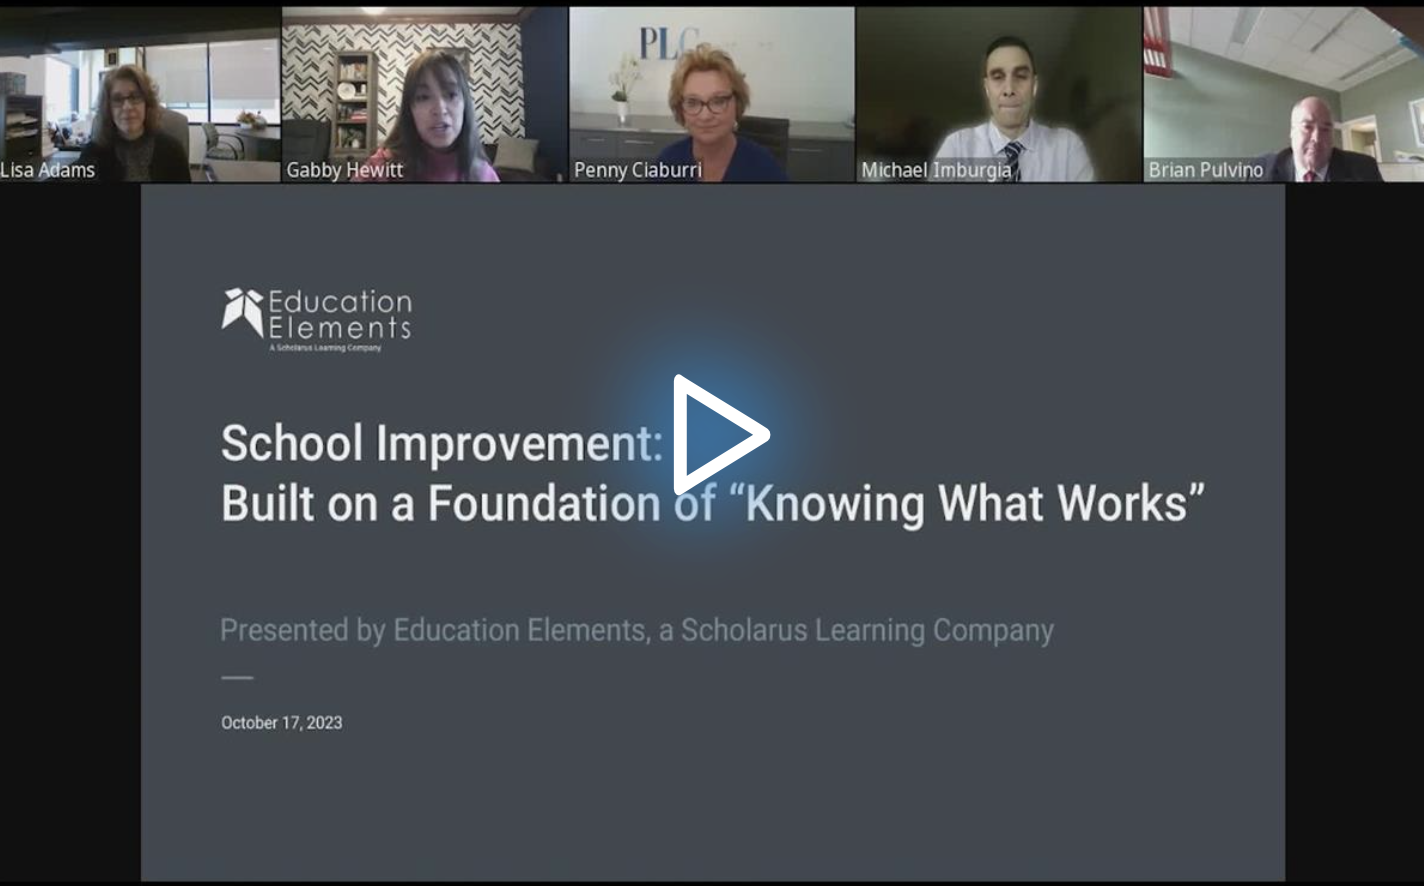 School Improvement: Built on a Foundation of “Knowing What Works” edLeader Panel recording screenshot